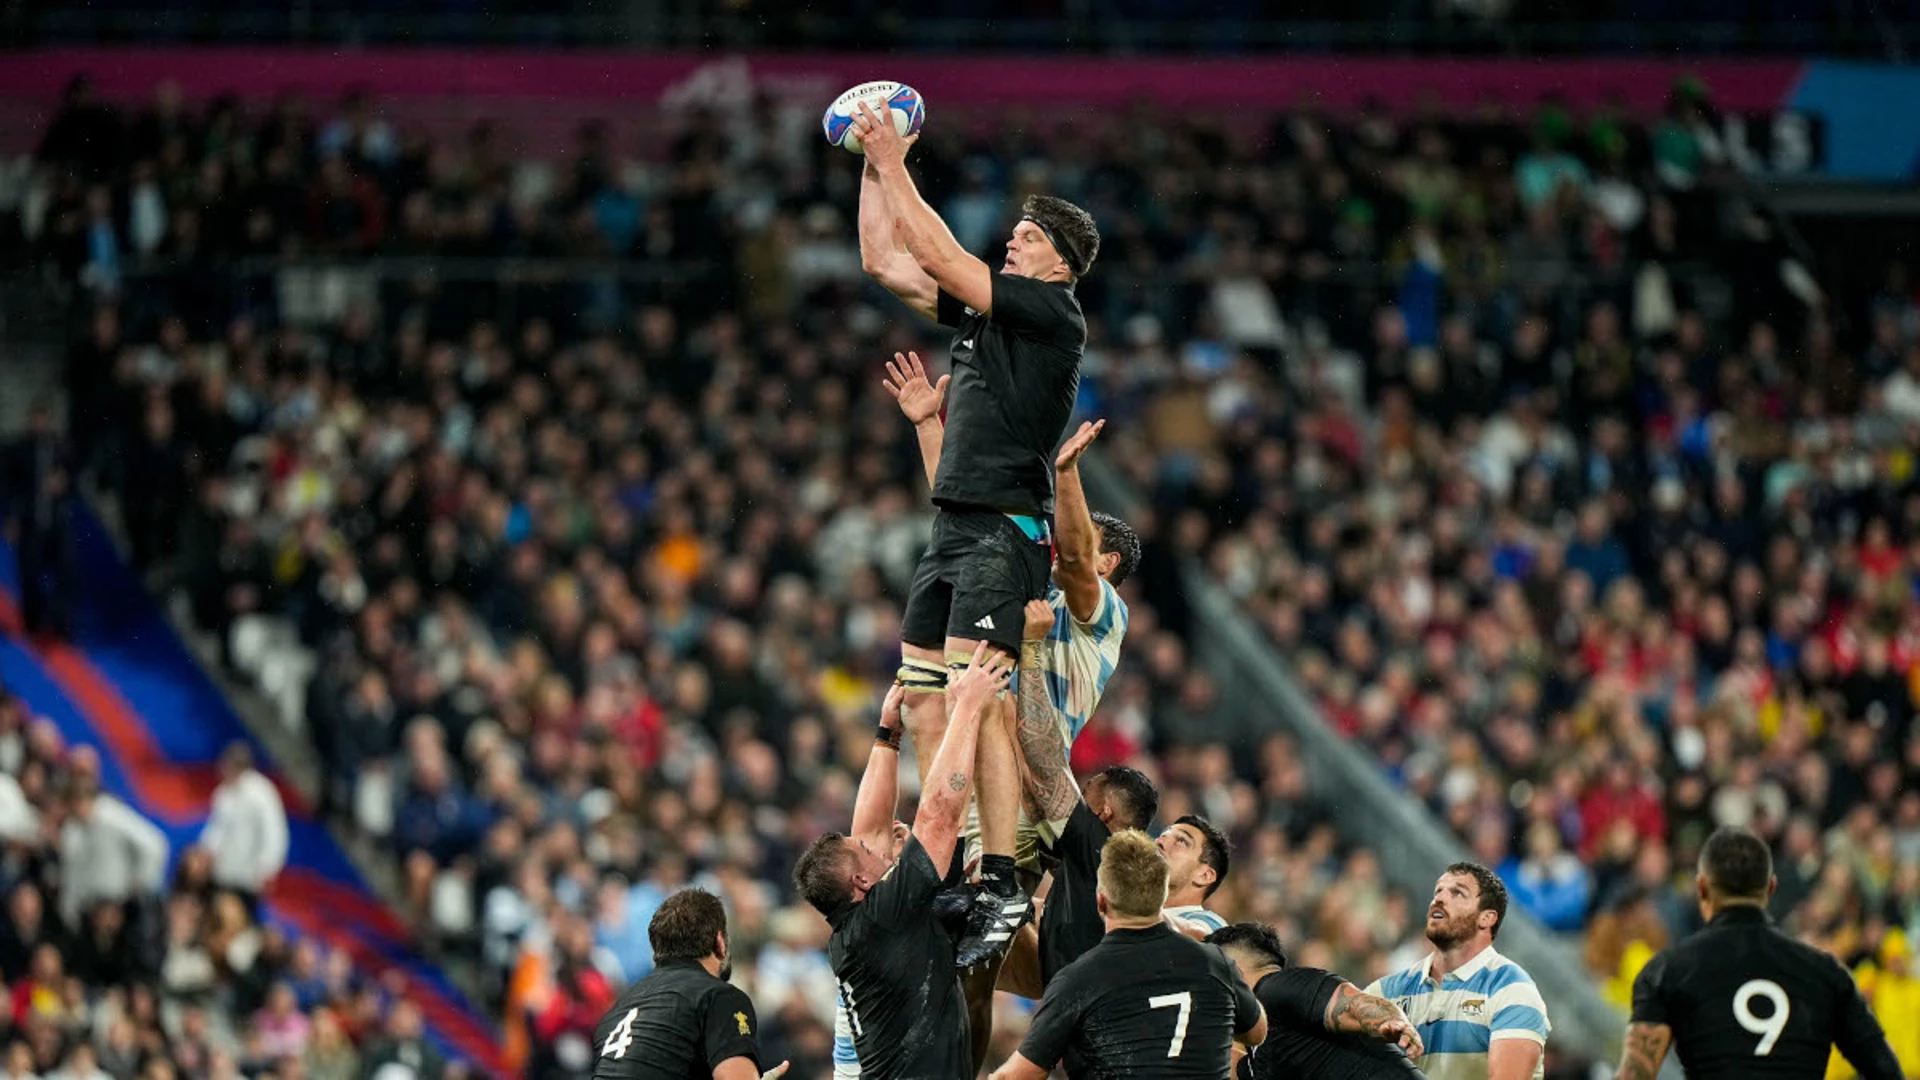 All Blacks brace for fast first test against England